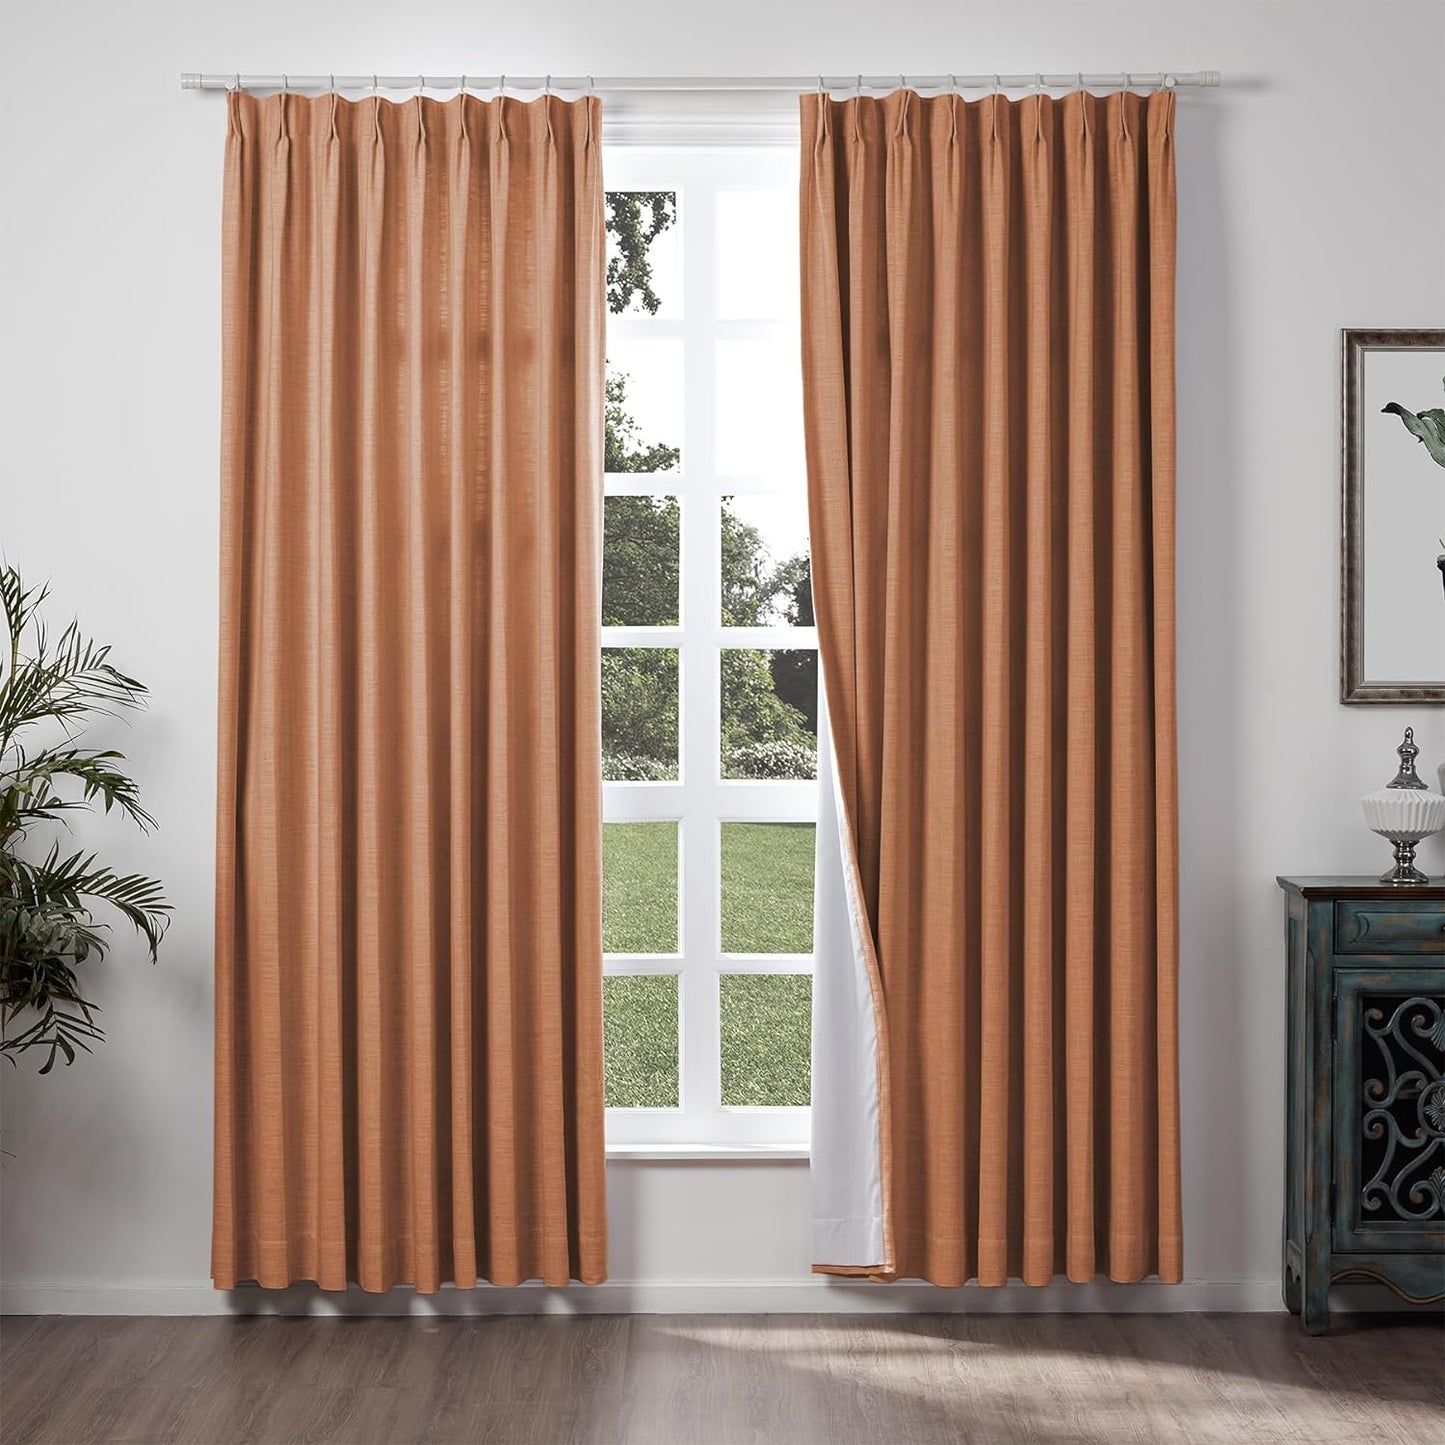 Chadmade 50" W X 84" L Polyester Linen Drape with Blackout Lining Pinch Pleat Curtain for Sliding Door Patio Door Living Room Bedroom, (1 Panel) Beige White Liz Collection  ChadMade Orange Copper (26) 72Wx84L 